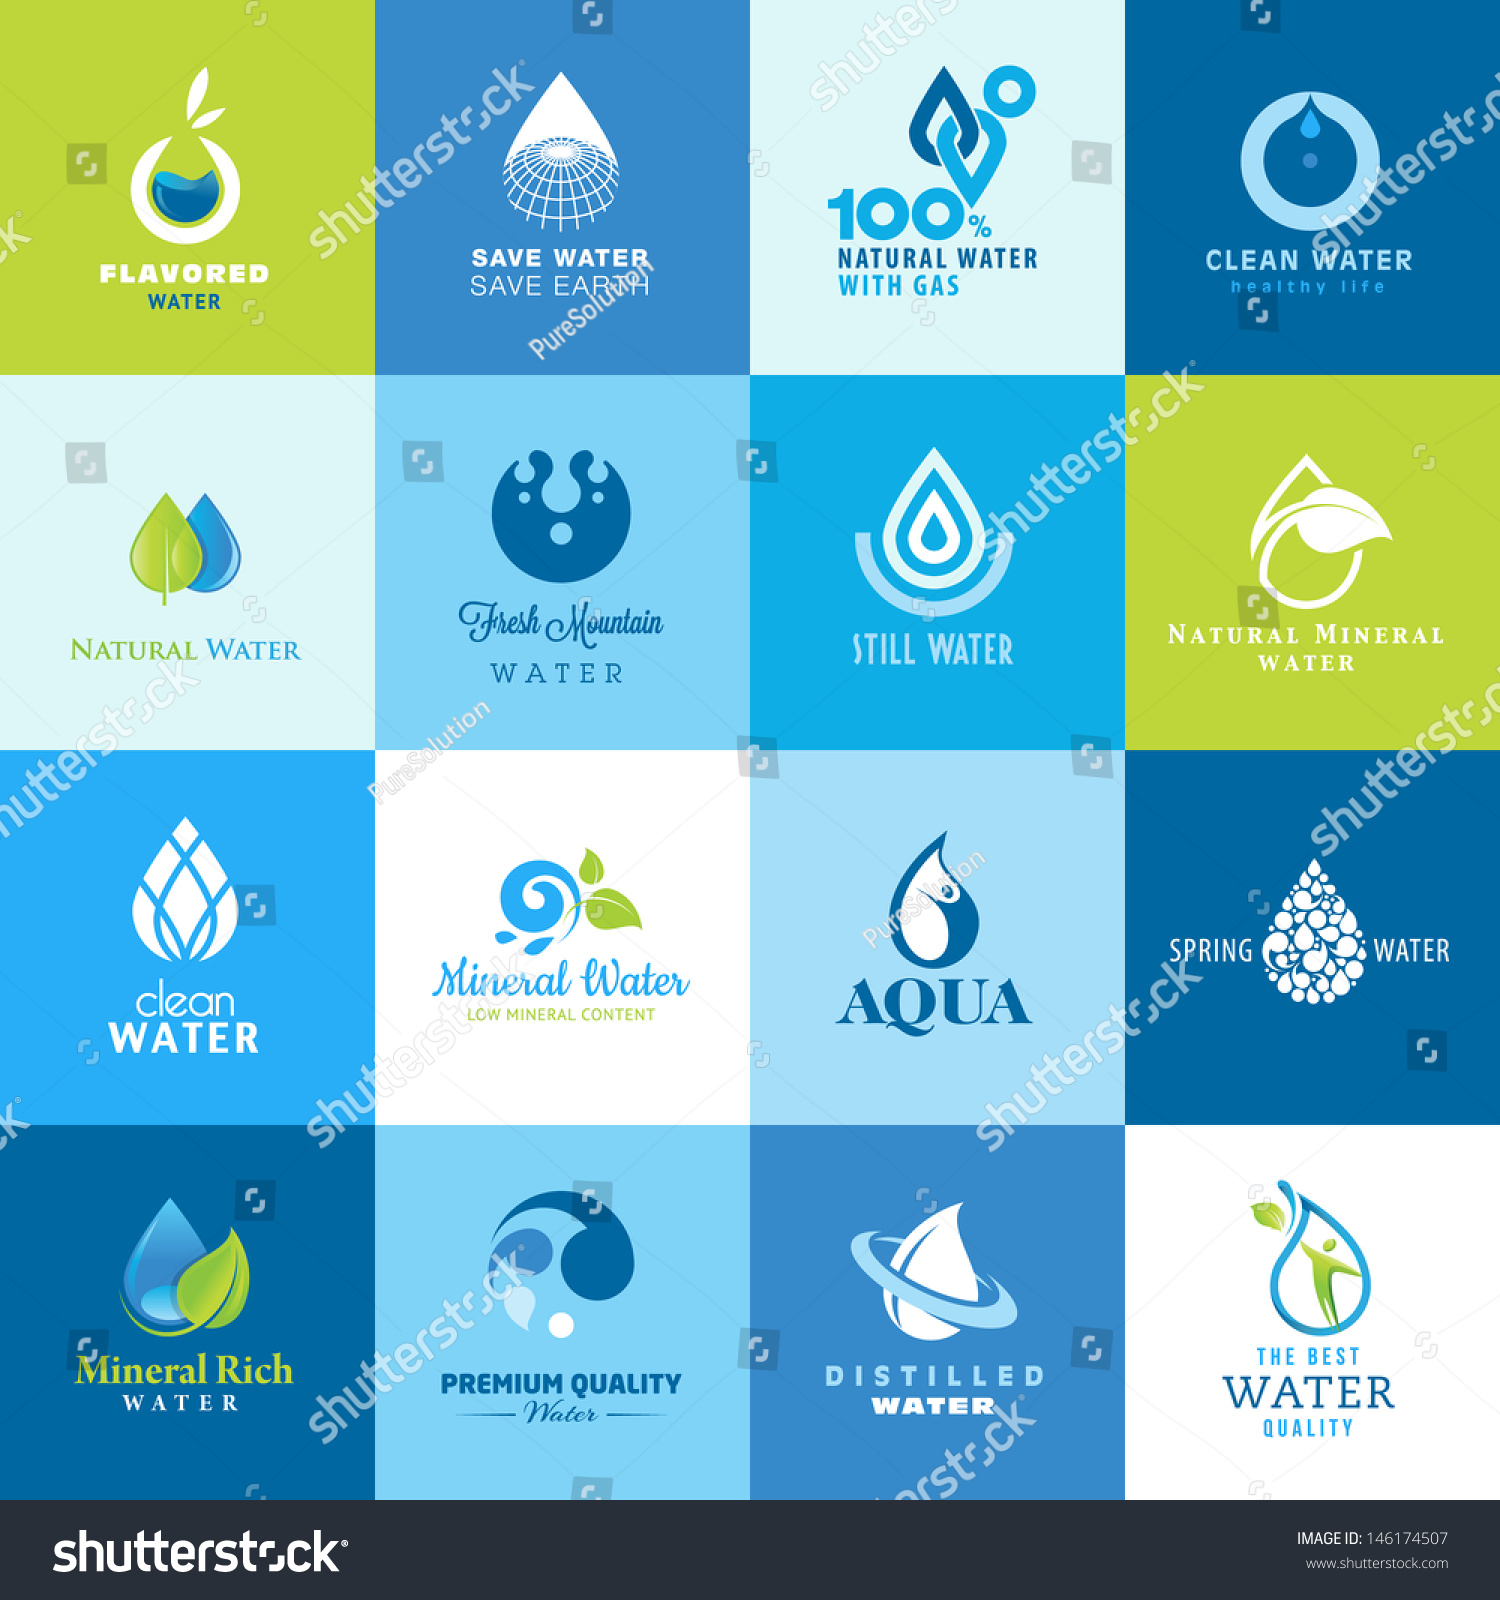 Set of icons for all types of water #146174507